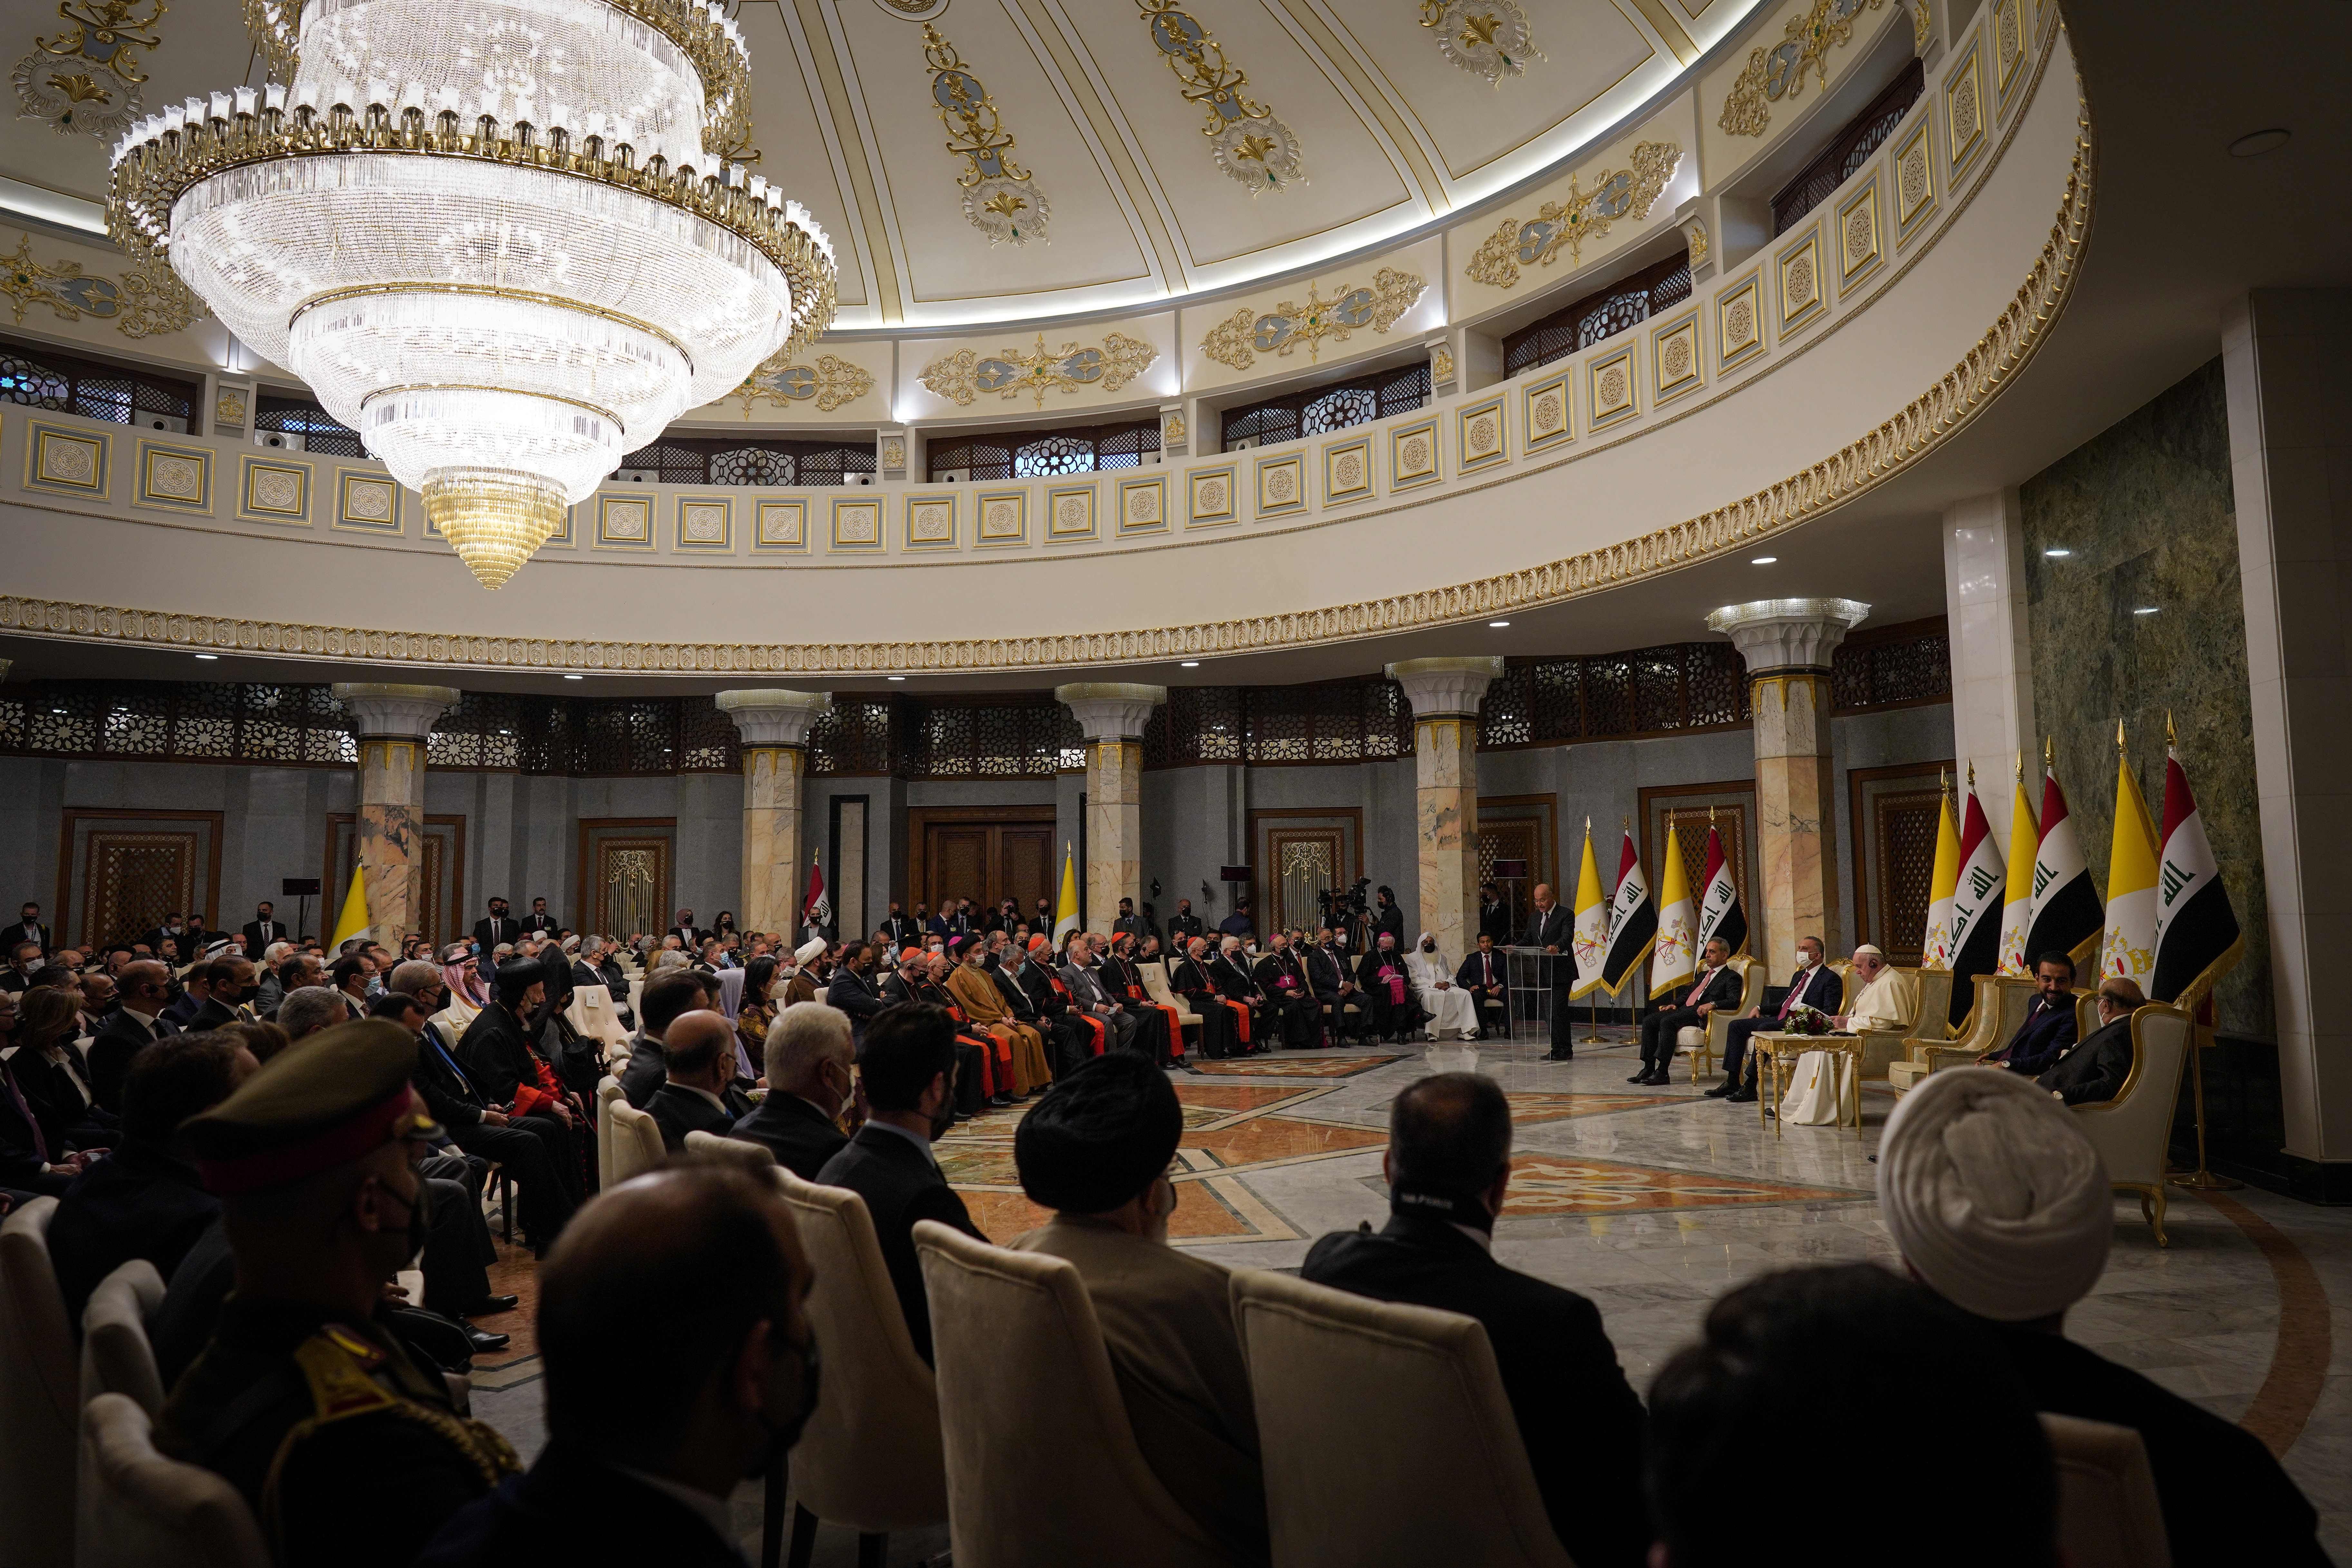 picture of the Iraq presidential palace, with a large crowd of people sitting on chairs looking at the Pope as he delivers a speech.